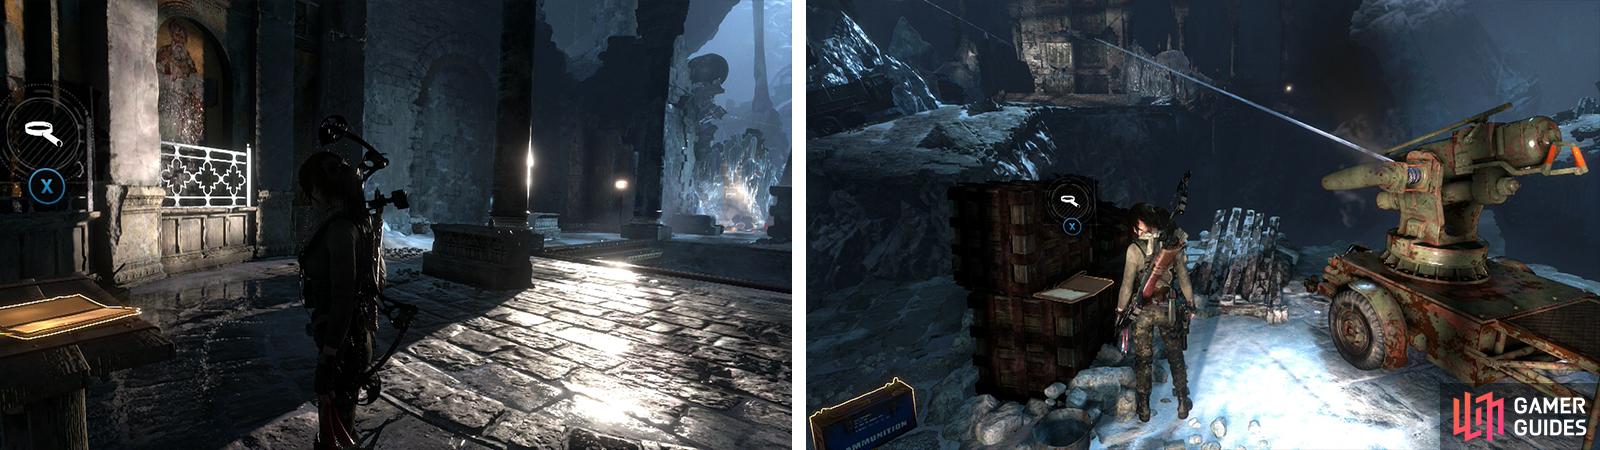 Once the enemies are dead, loot Document 03 in the first room (left) and then Document 04 from the crates by the rope launcher (right).